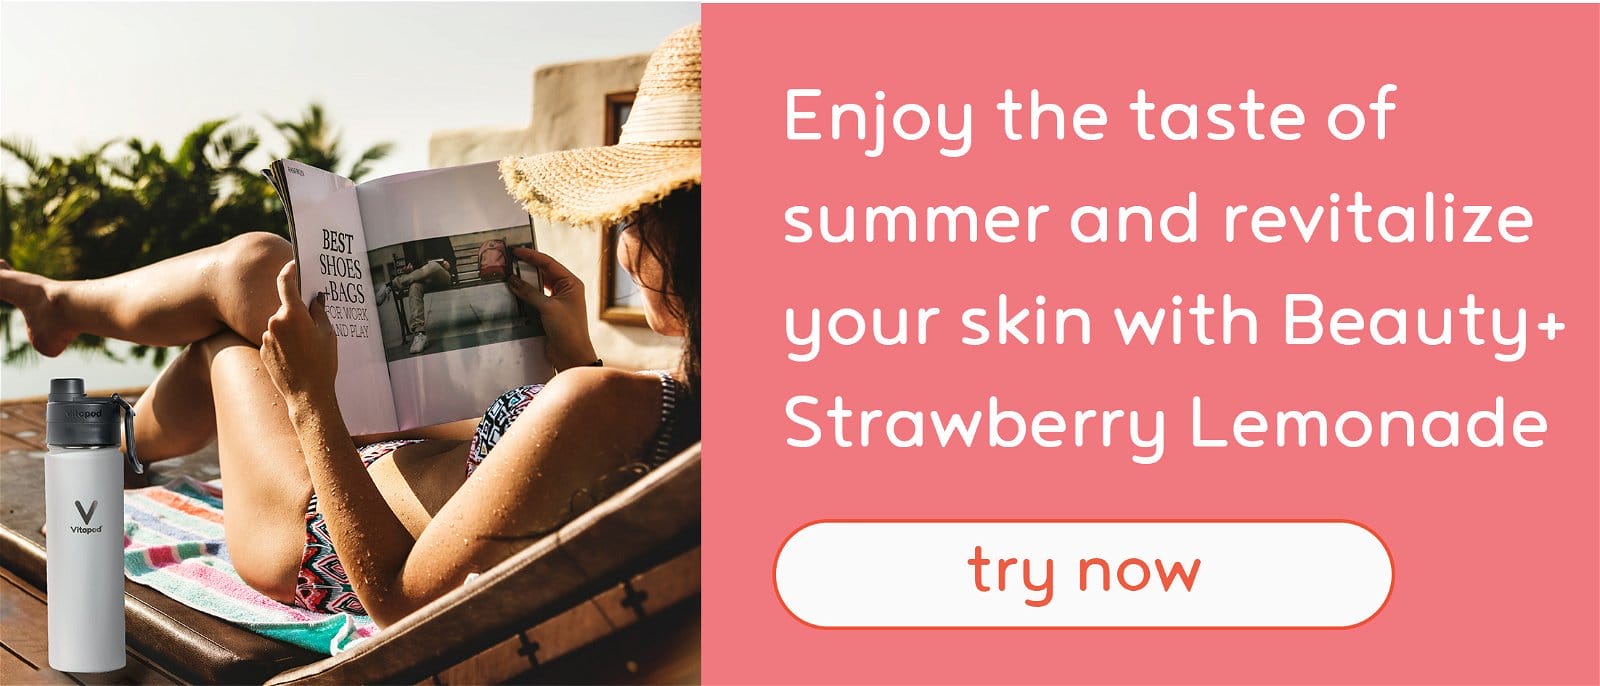 Enjoy the taste of summer and revitalize your skin with Beauty+ Strawberry Lemonade